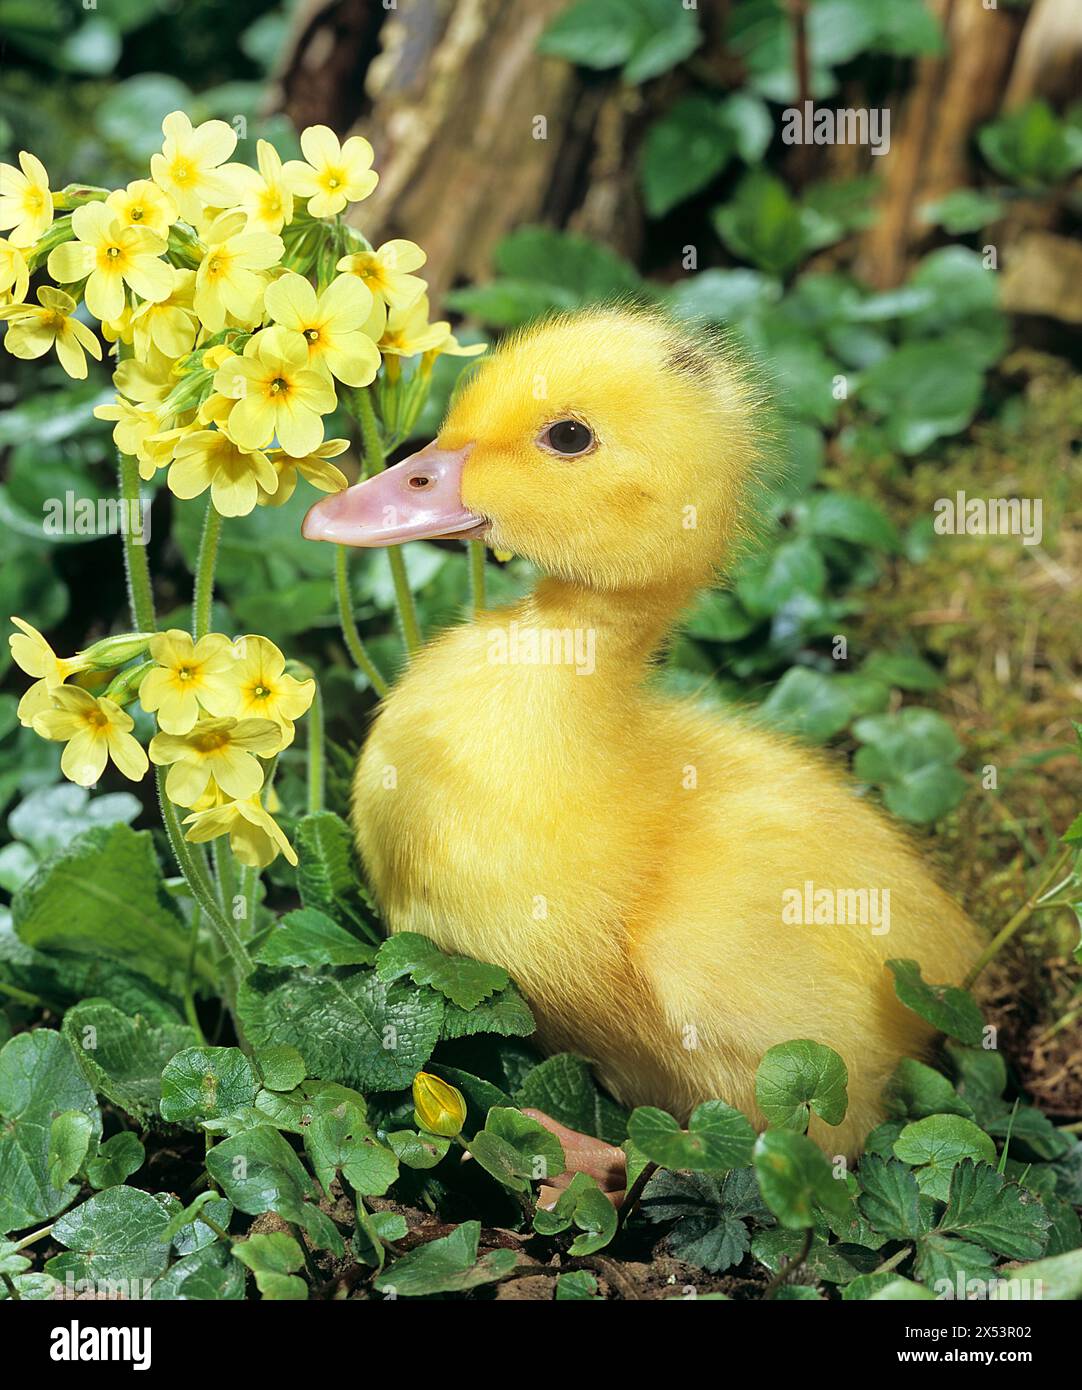 Duckling outdoors in wet meadow with oxlips. South Germany Stock Photo